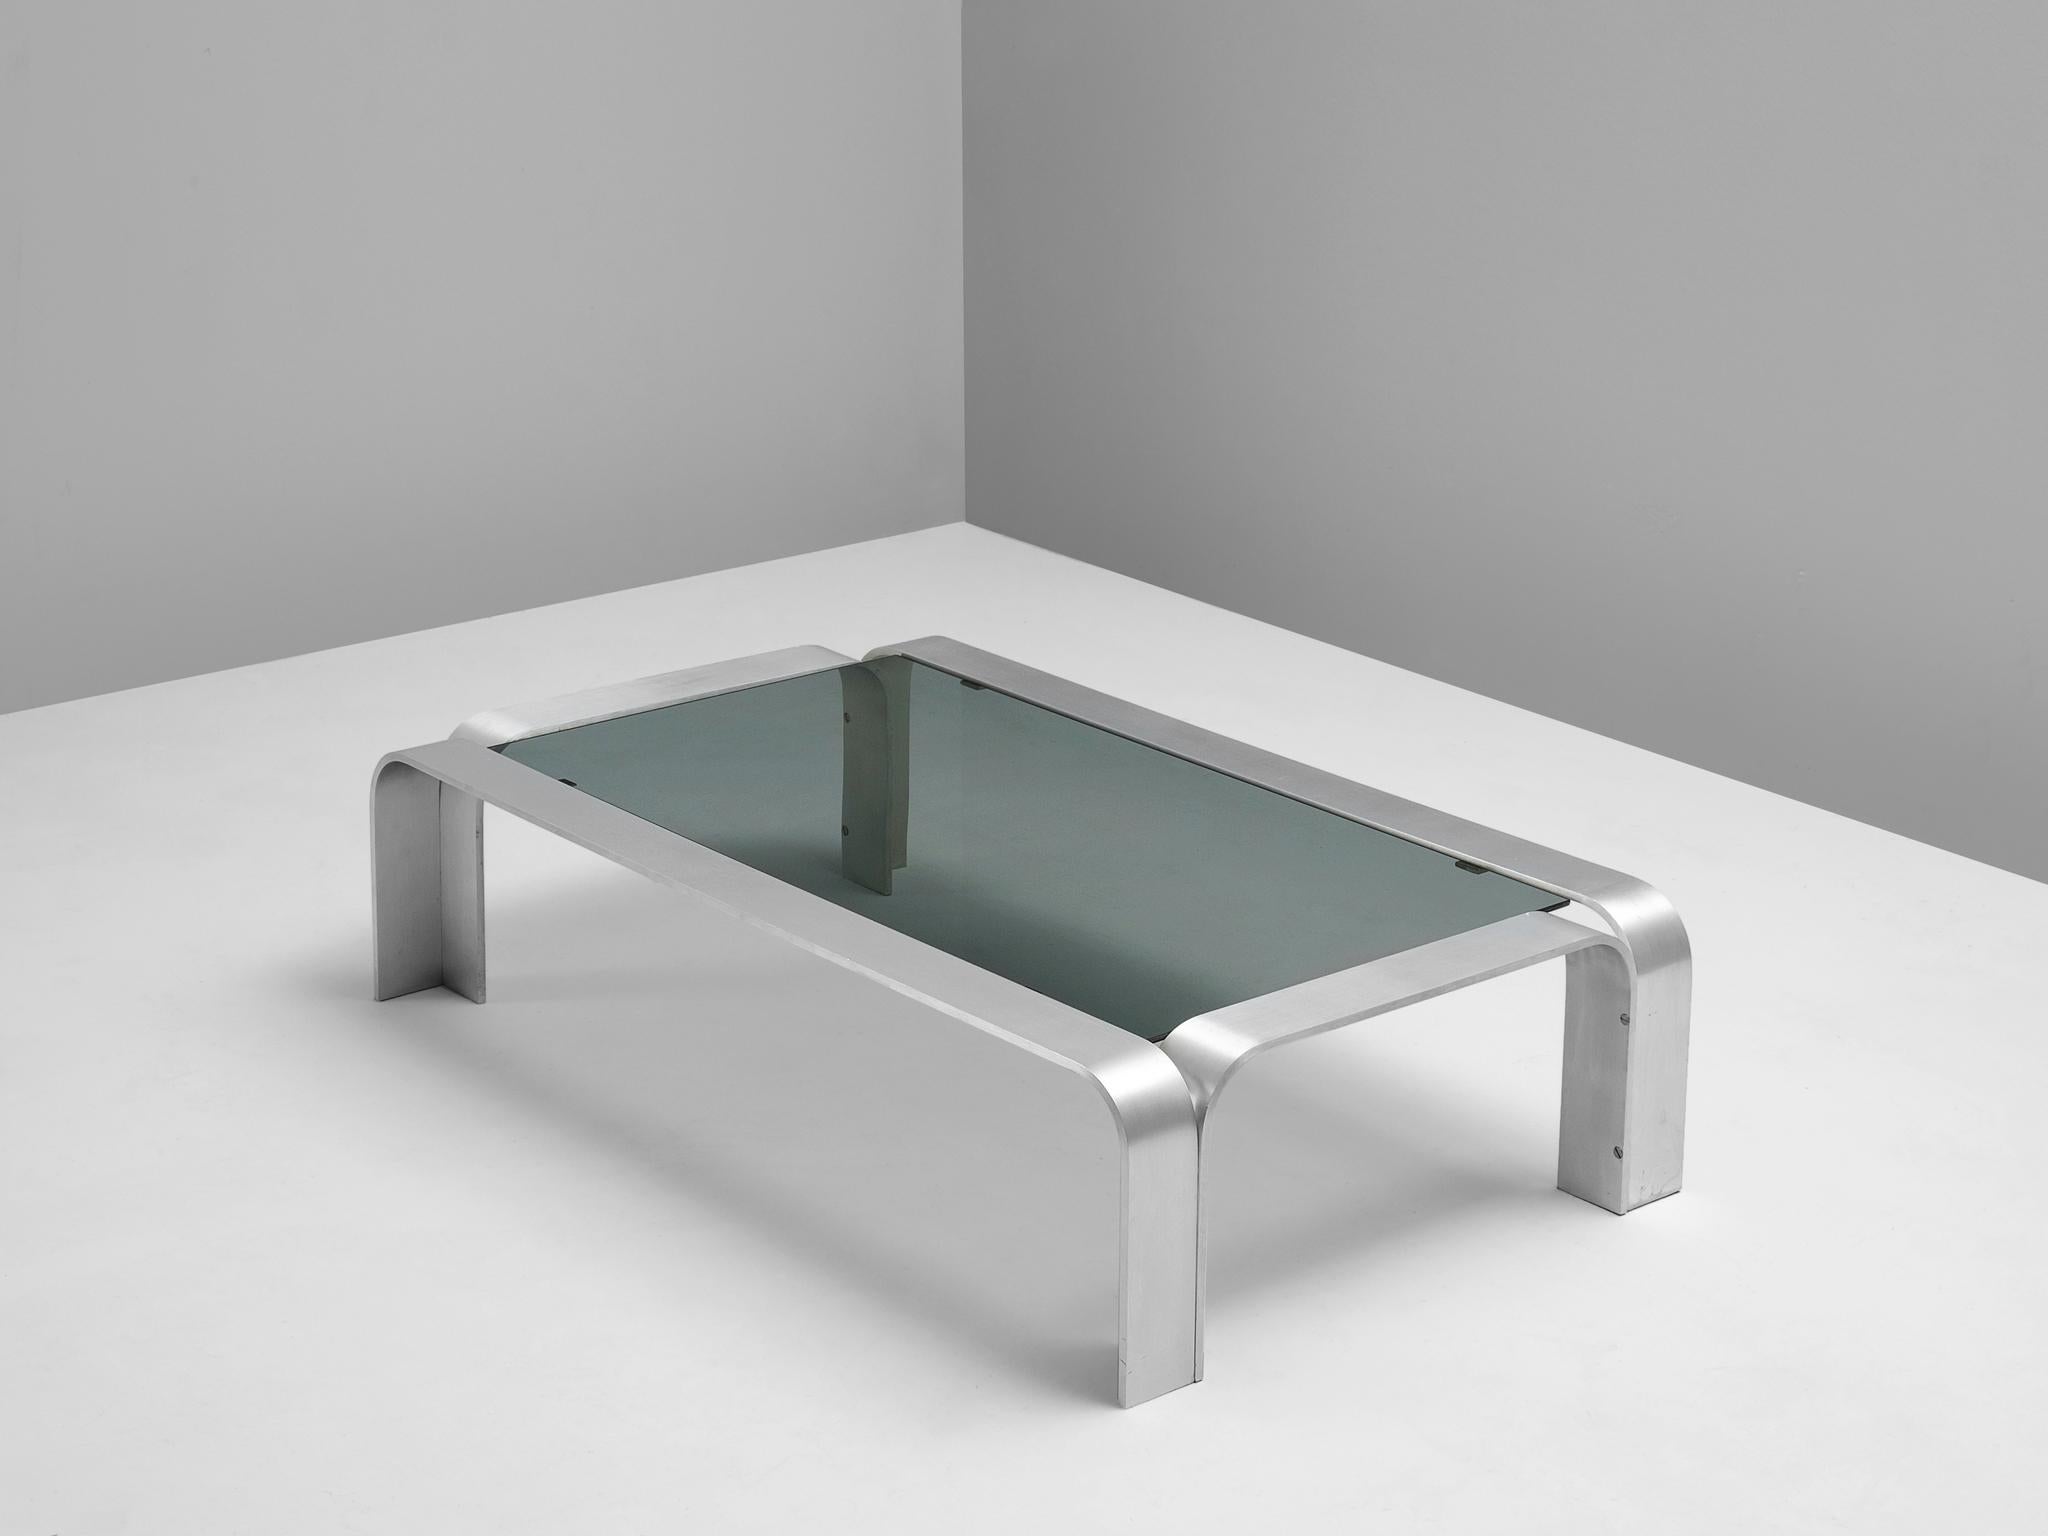 Coffee table, aluminum and glass, European, 1970s.

Modernist coffee table. The rectangular table is accompanied by a dark glass top. The aluminum frame consist of four bended arches. The frame is manufactured from metal strips and rounded edges.